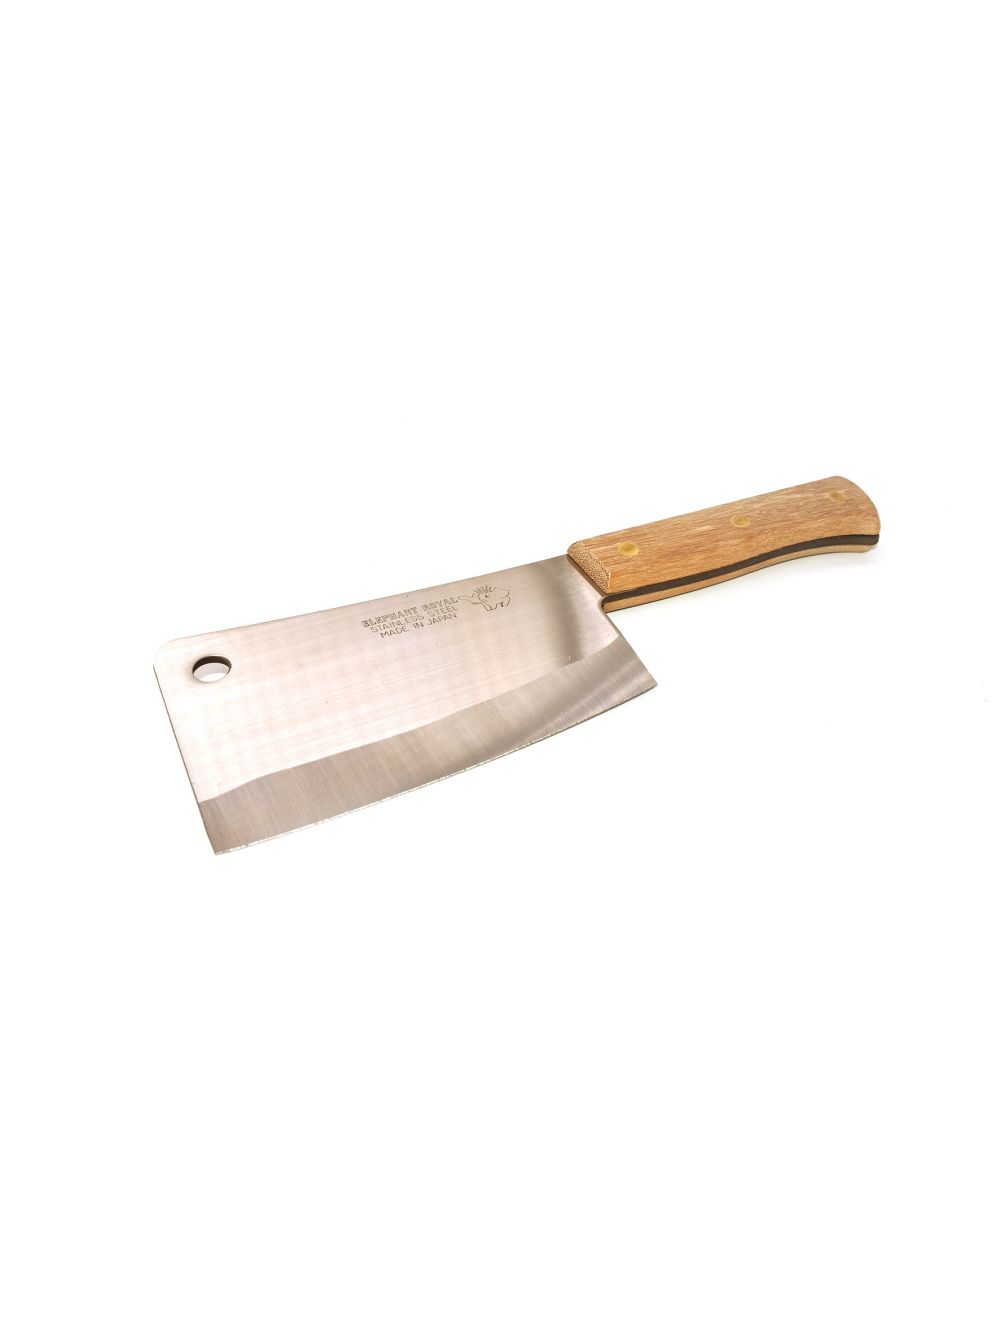 Cleaver Knife Wooden 6 inches